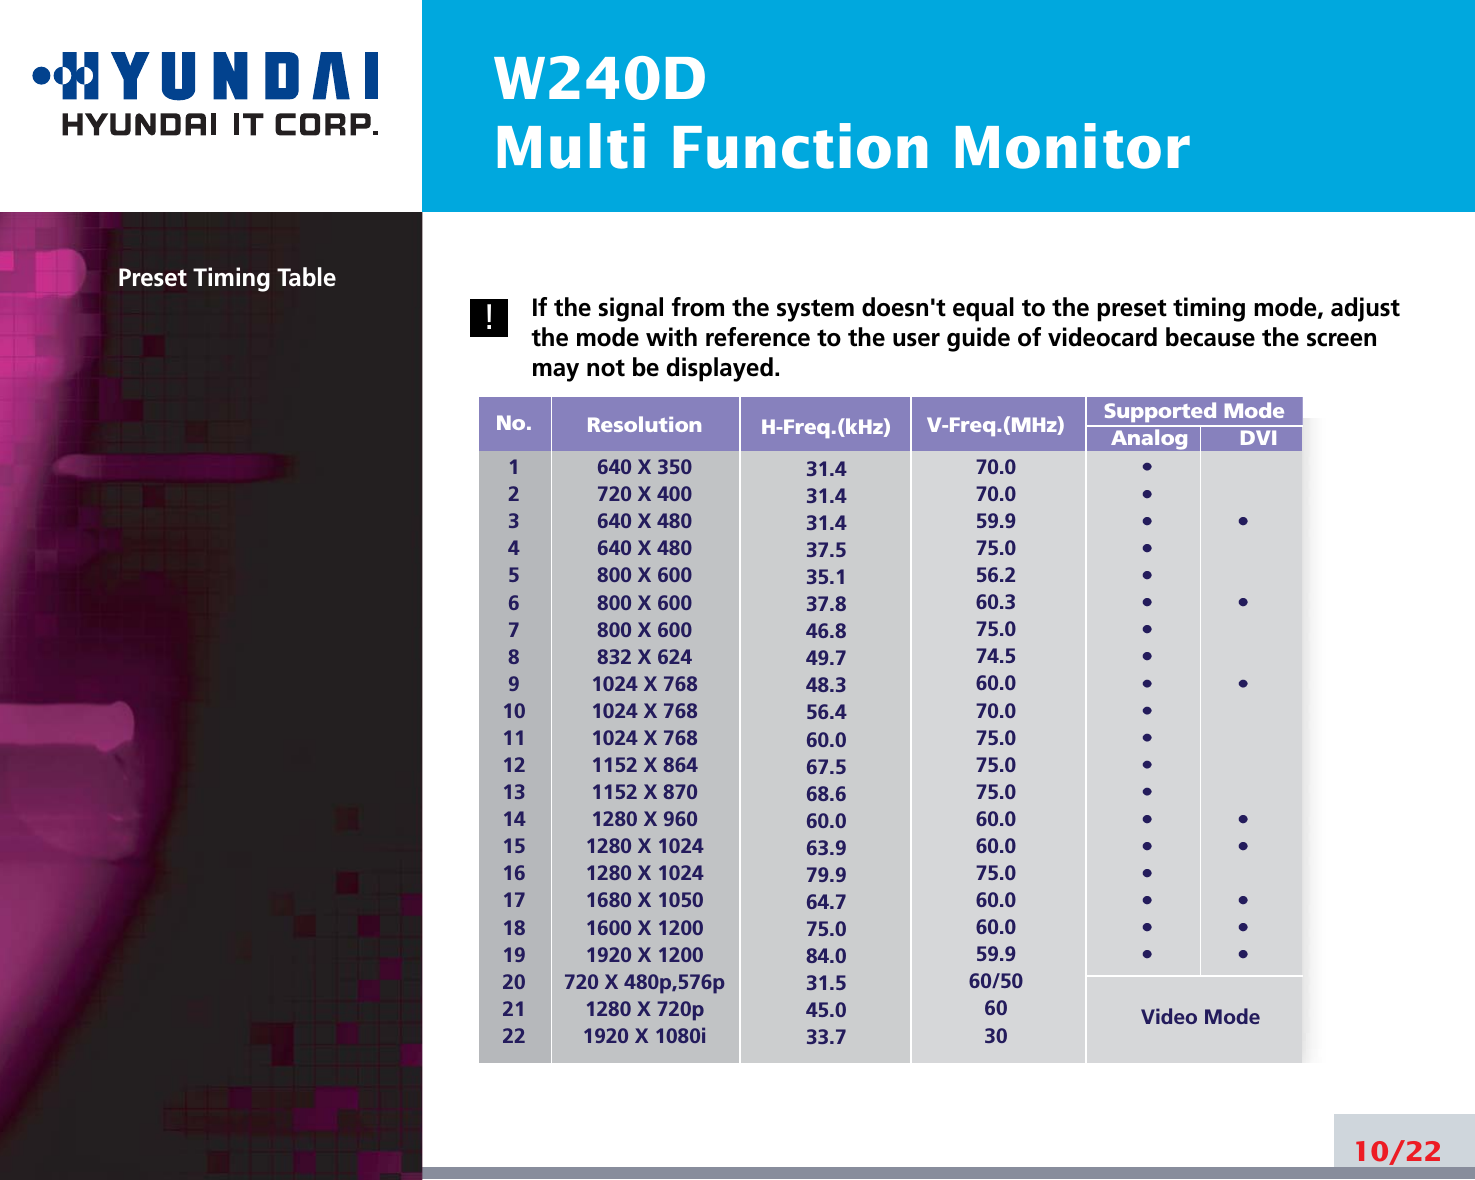 W240DMulti Function Monitor10/22Preset Timing TableIf the signal from the system doesn&apos;t equal to the preset timing mode, adjustthe mode with reference to the user guide of videocard because the screenmay not be displayed.!Resolution640 X 350720 X 400640 X 480640 X 480800 X 600800 X 600800 X 600832 X 6241024 X 7681024 X 7681024 X 7681152 X 8641152 X 8701280 X 9601280 X 10241280 X 10241680 X 10501600 X 12001920 X 1200720 X 480p,576p1280 X 720p1920 X 1080iH-Freq.(kHz)31.431.431.437.535.137.846.849.748.356.460.067.568.660.063.979.964.775.084.031.545.033.7V-Freq.(MHz)70.070.059.975.056.260.375.074.560.070.075.075.075.060.060.075.060.060.059.960/506030Supported ModeAnalog        DVIVideo ModeNo.12345678910111213141516171819202122